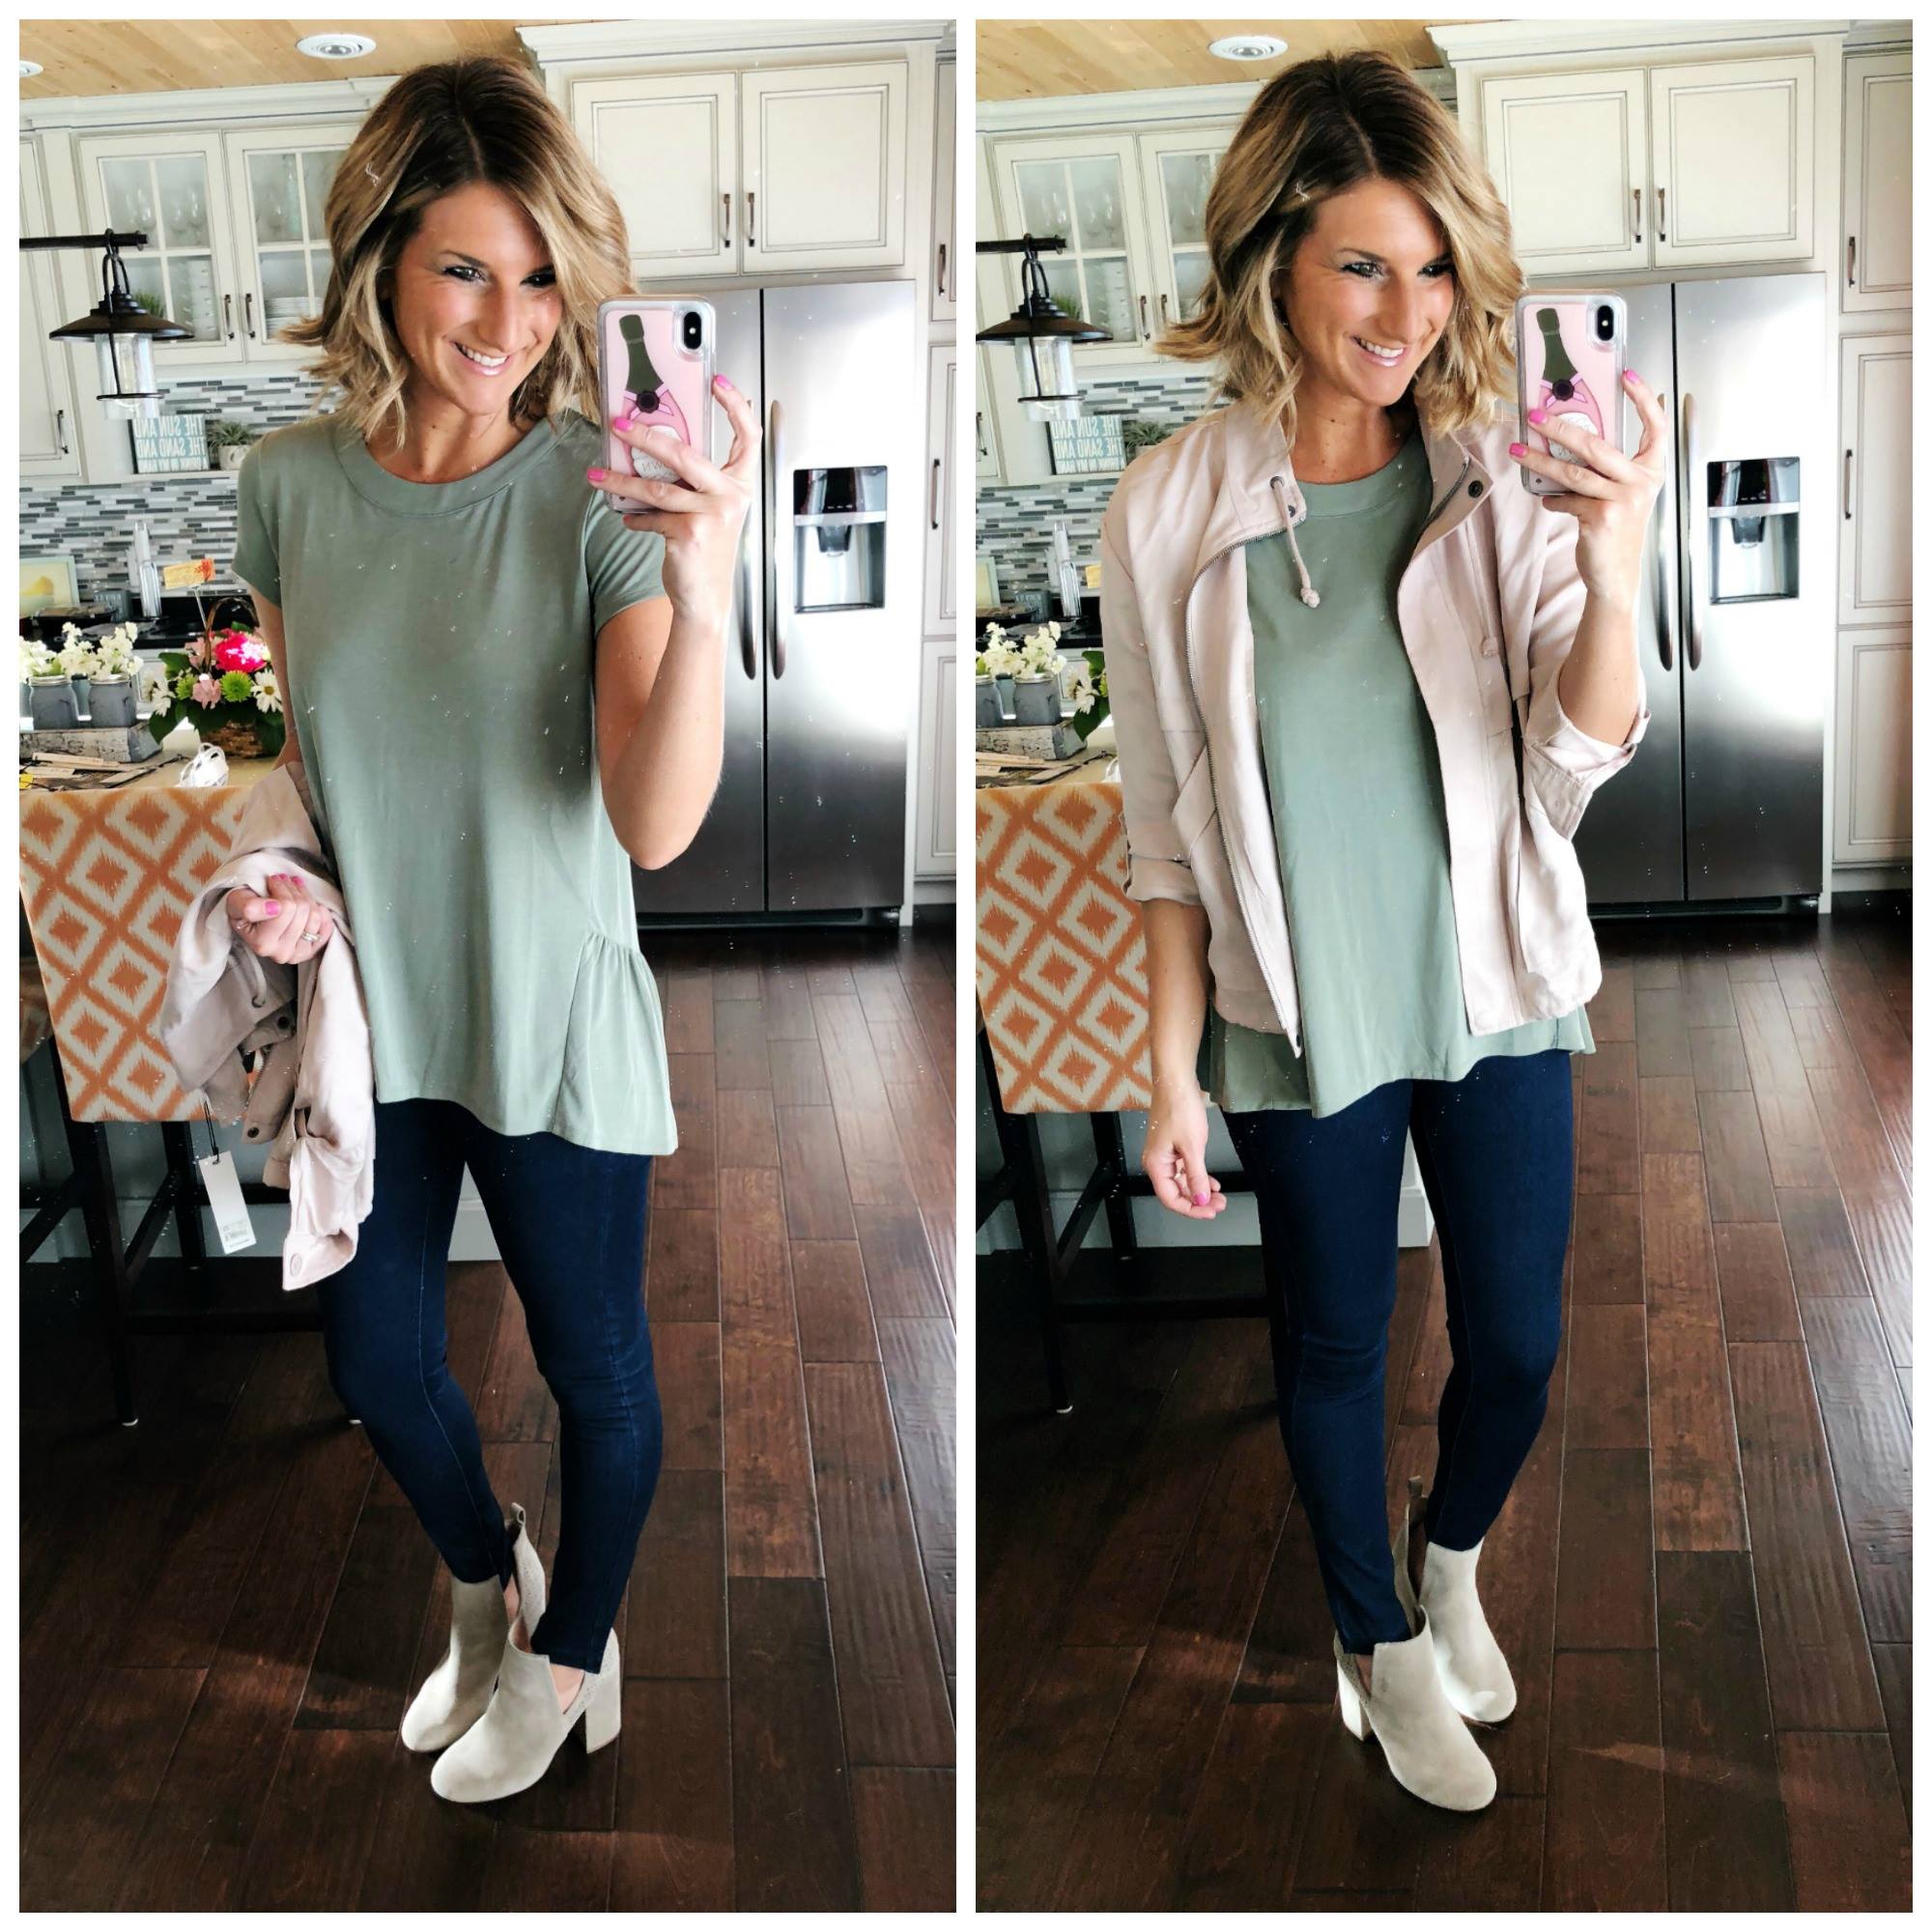 Spring Jacket // Casual Spring Outfit // Ruffle Hem Top + Pull On Jeggings + Blush Jacket + Cutout Booties